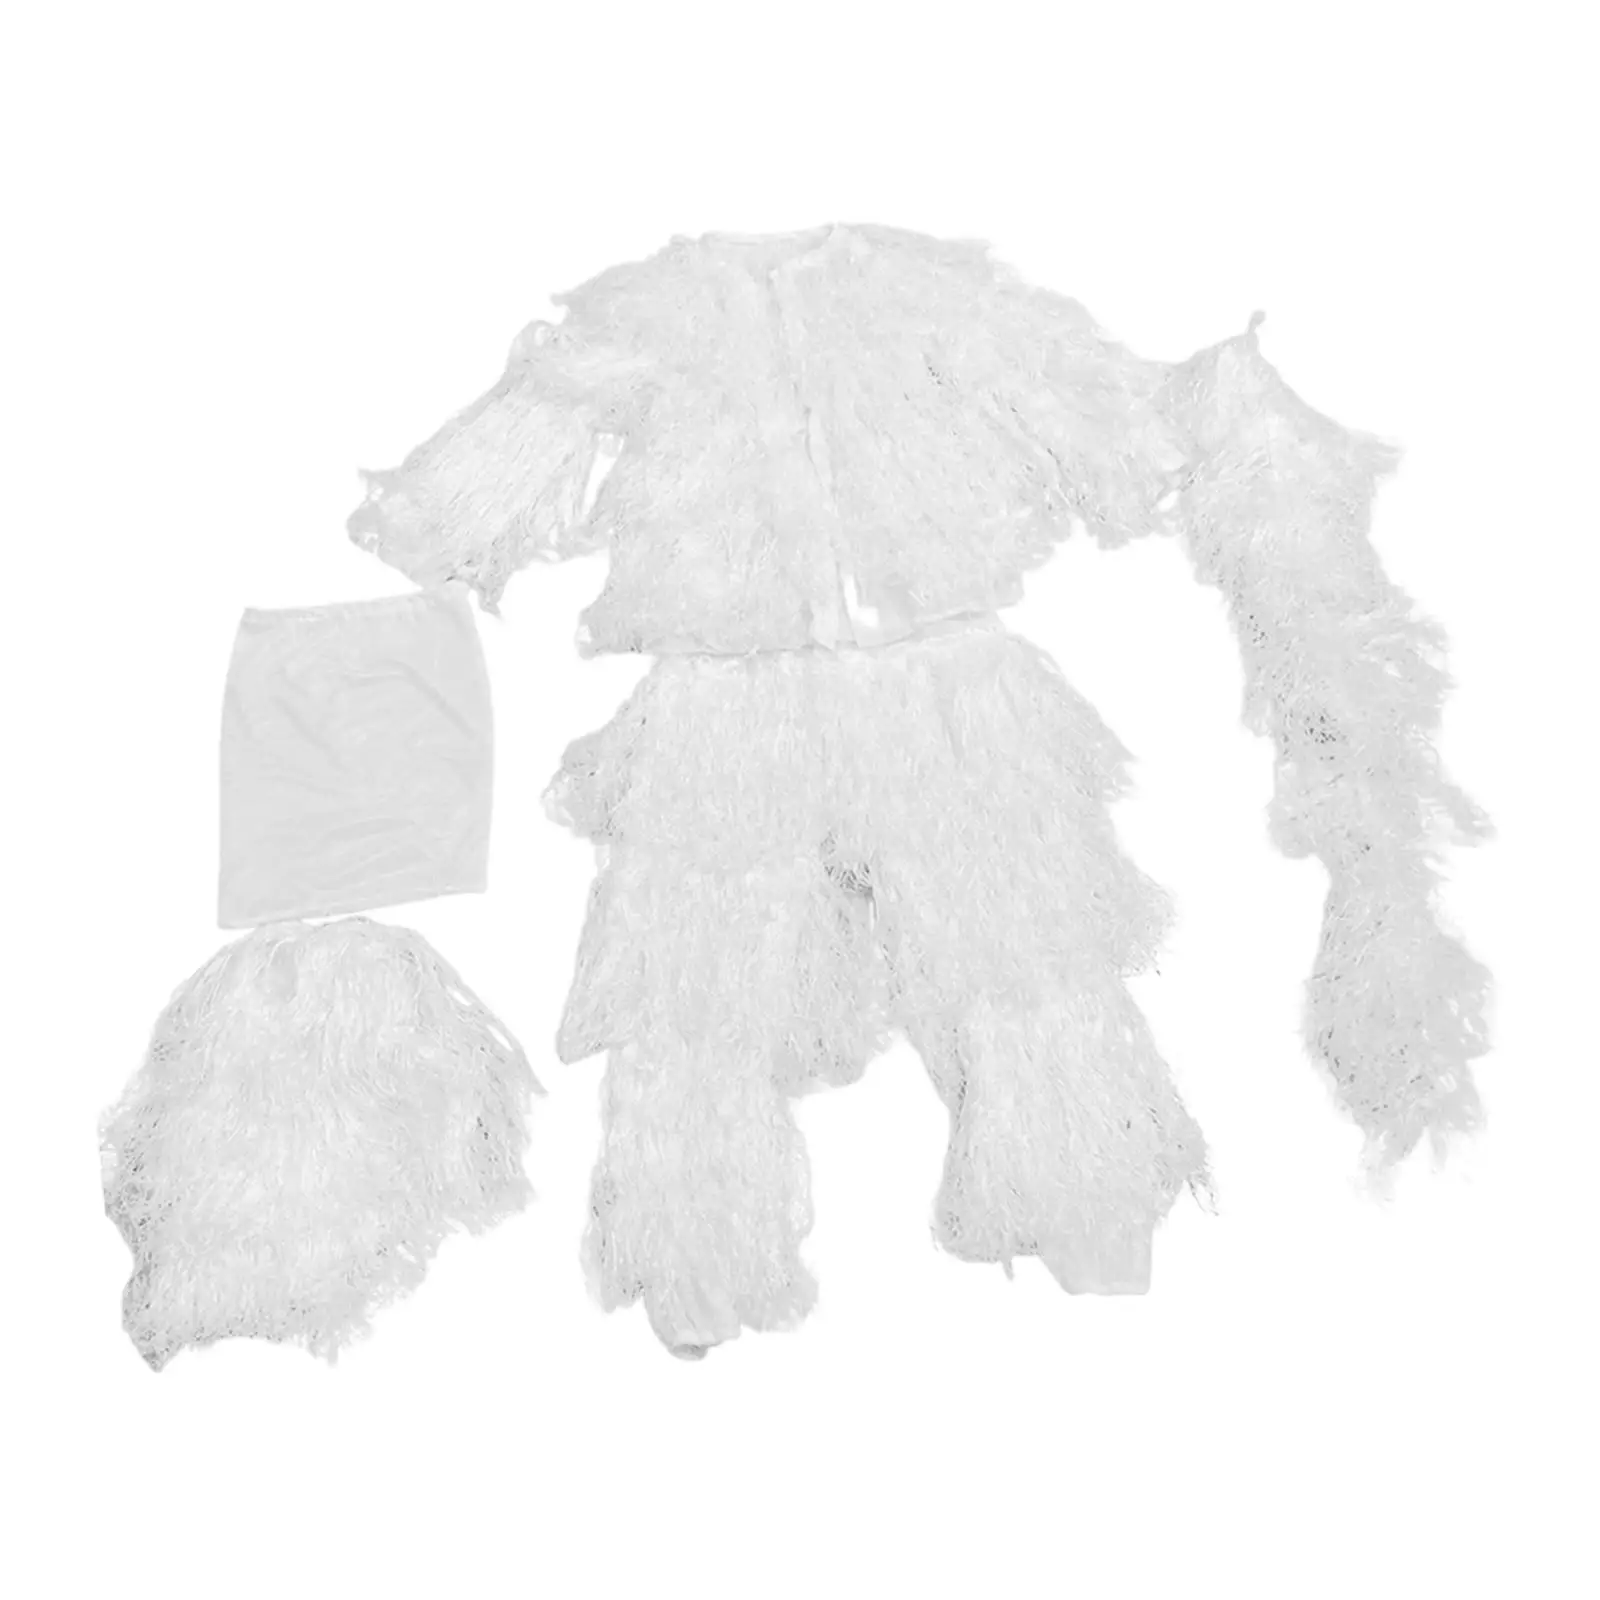 Children Ghillie Suit Fancy Dress Apparel Pants Disguise with Storage Bag Clothing for Party Game Hunting Outdoor Bird Watching